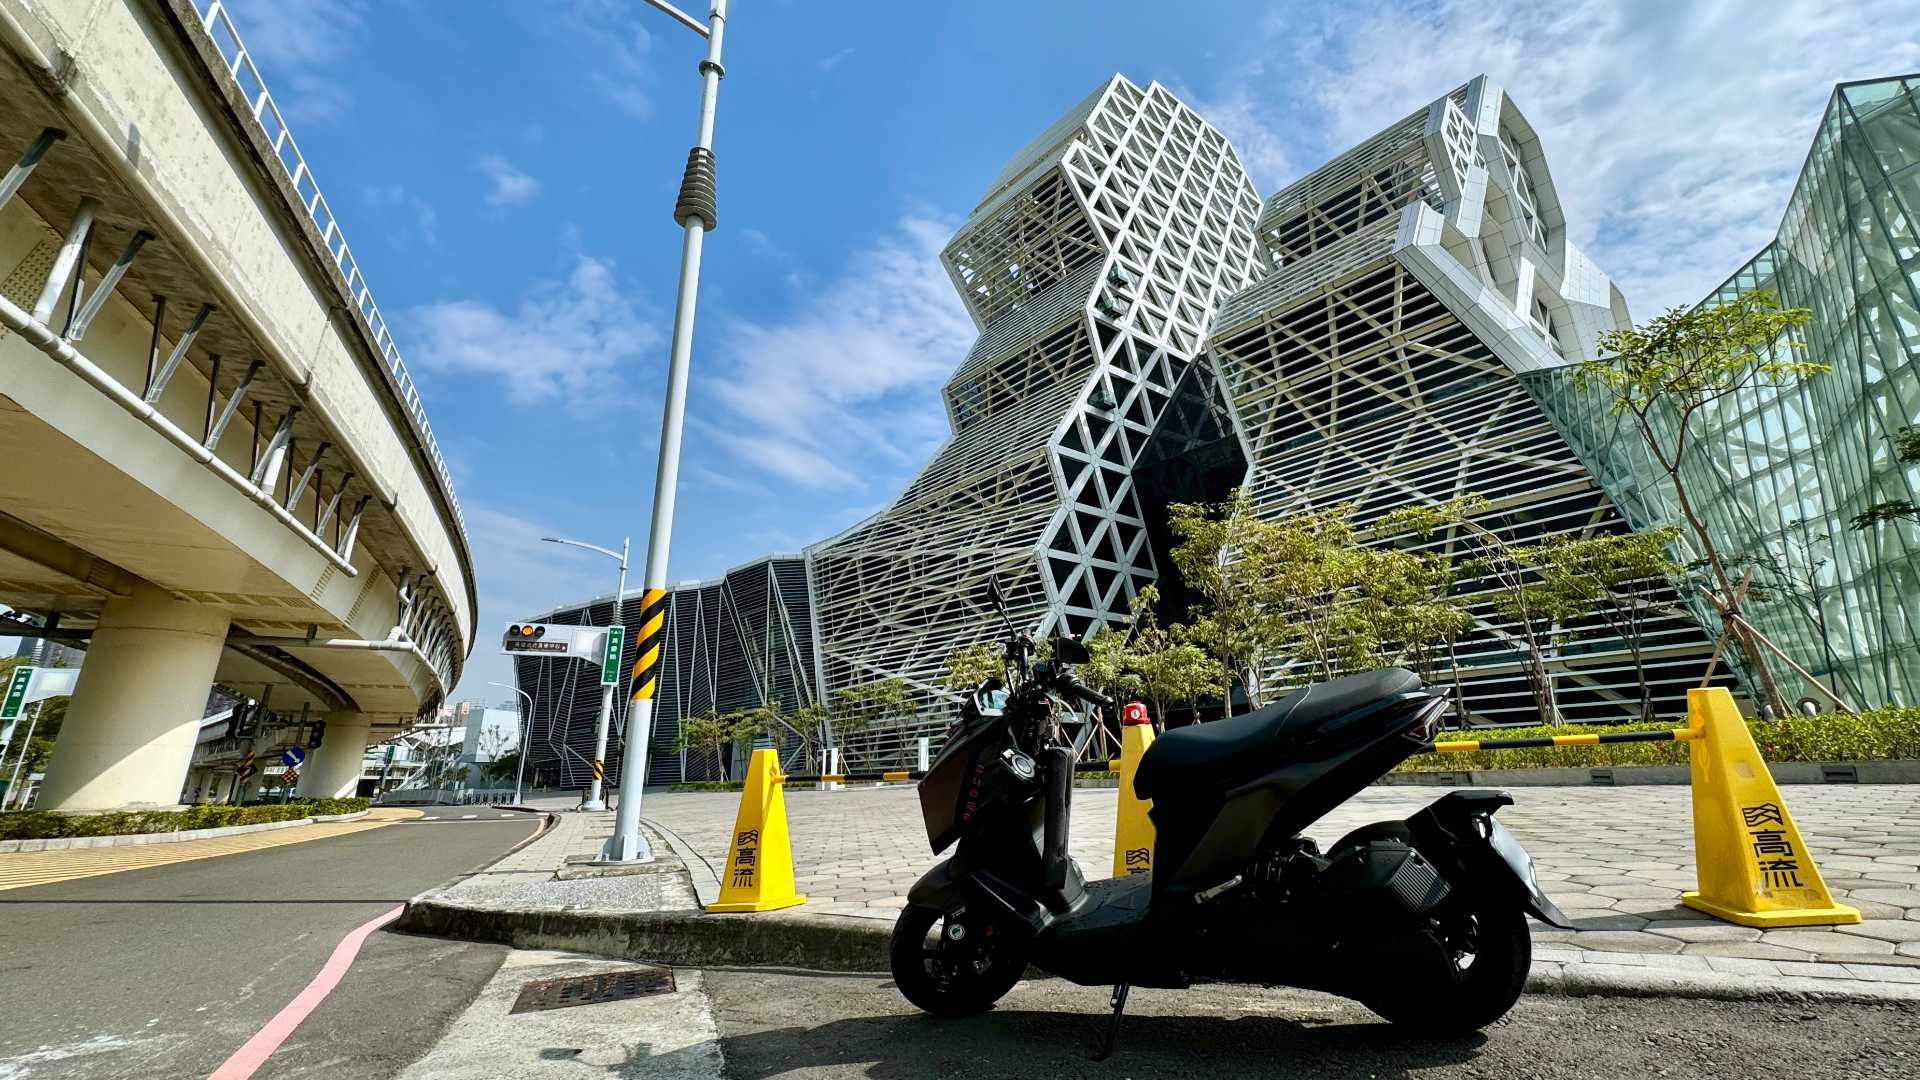 A scooter parked on the street outside Kaohsiung Music Center. A short, lightweight, yellow-and-black barrier is erected on the other side of the scooter.